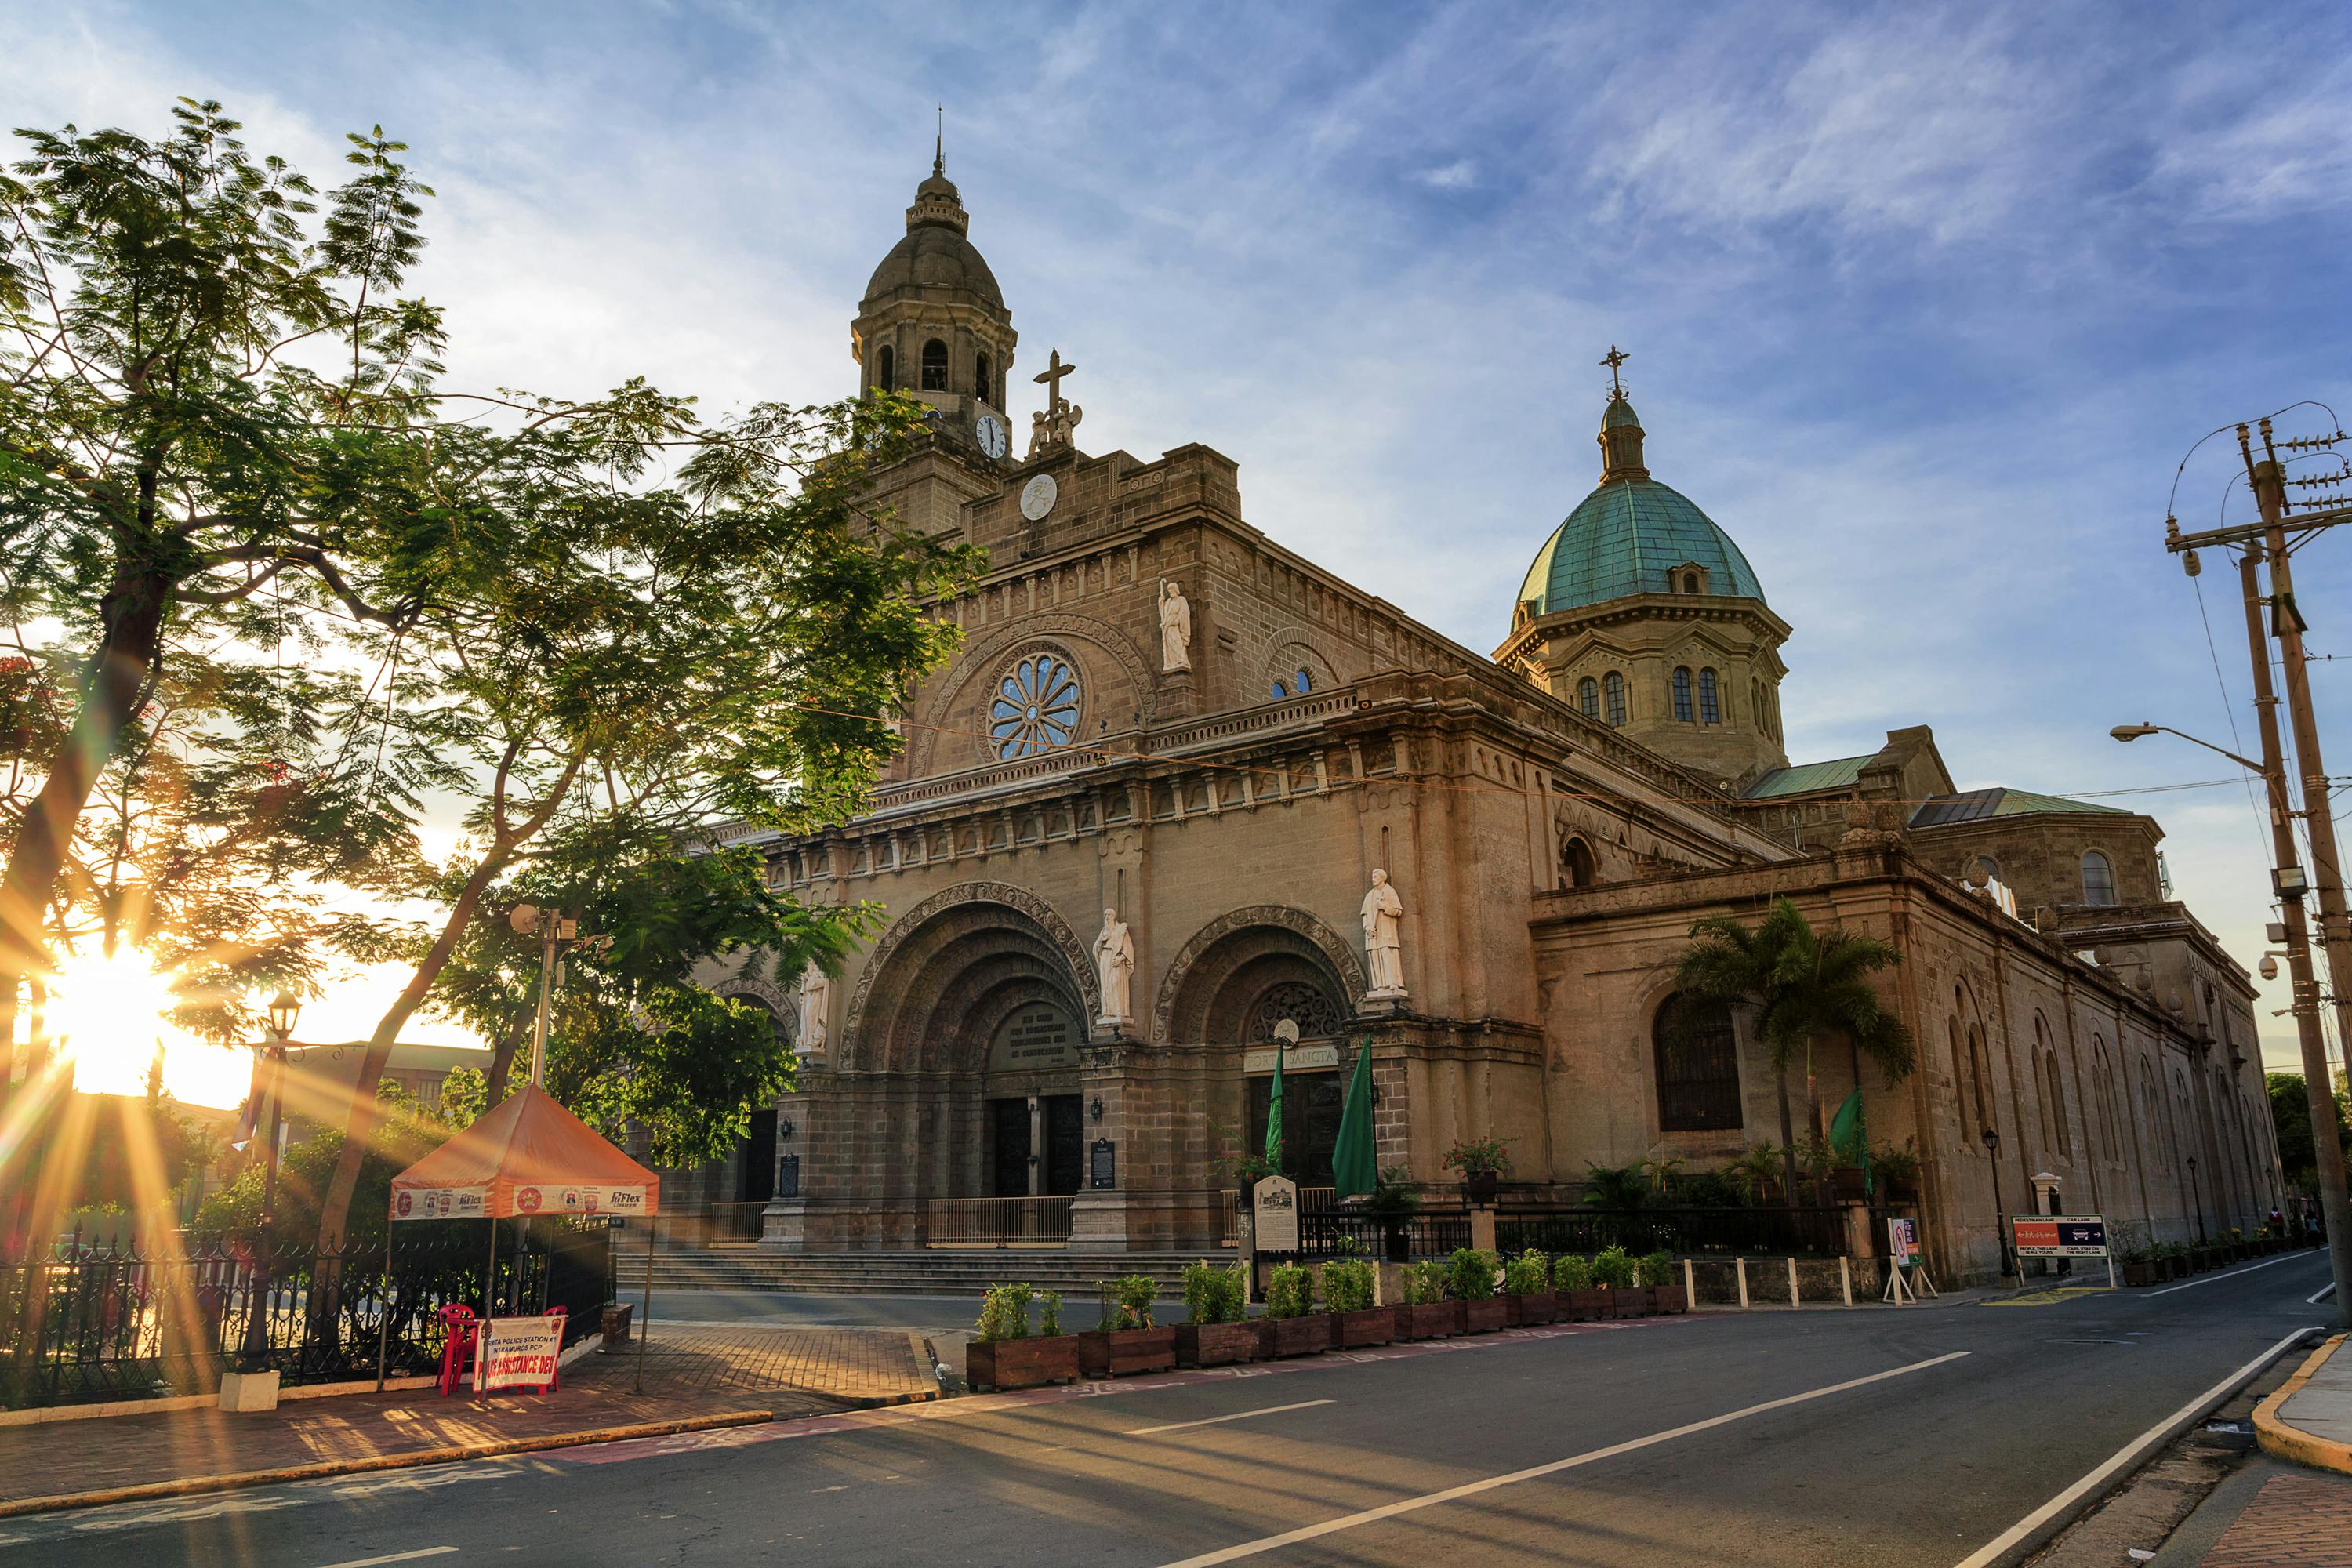 Manila Cathedral is one of the most beautiful churches in Metro Manila